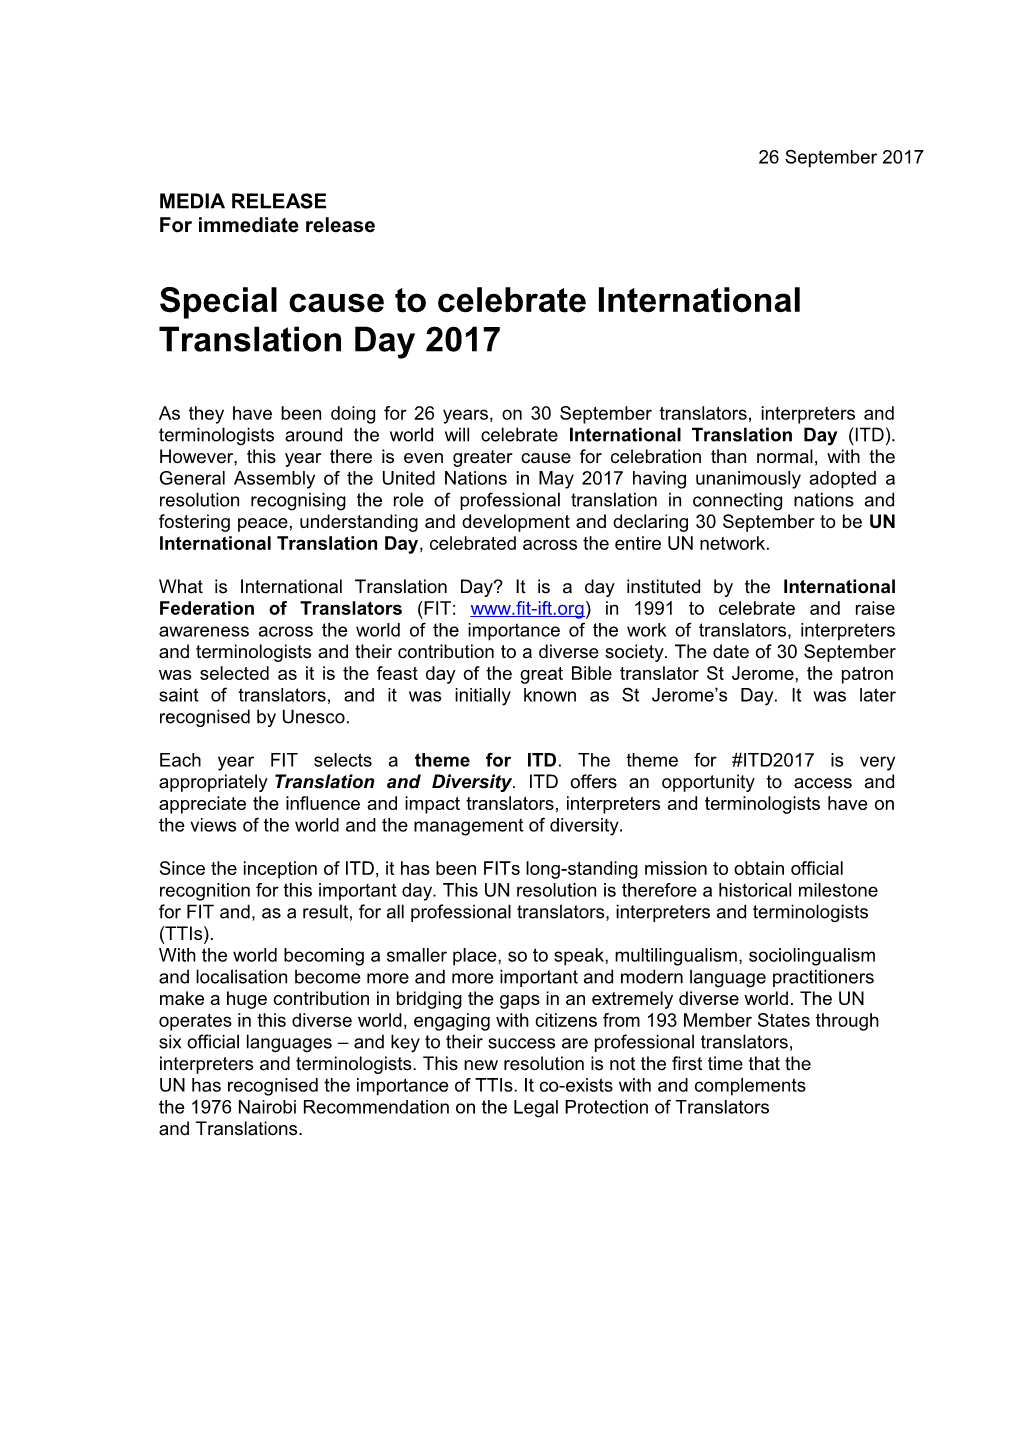 Special Cause to Celebrate International Translation Day 2017